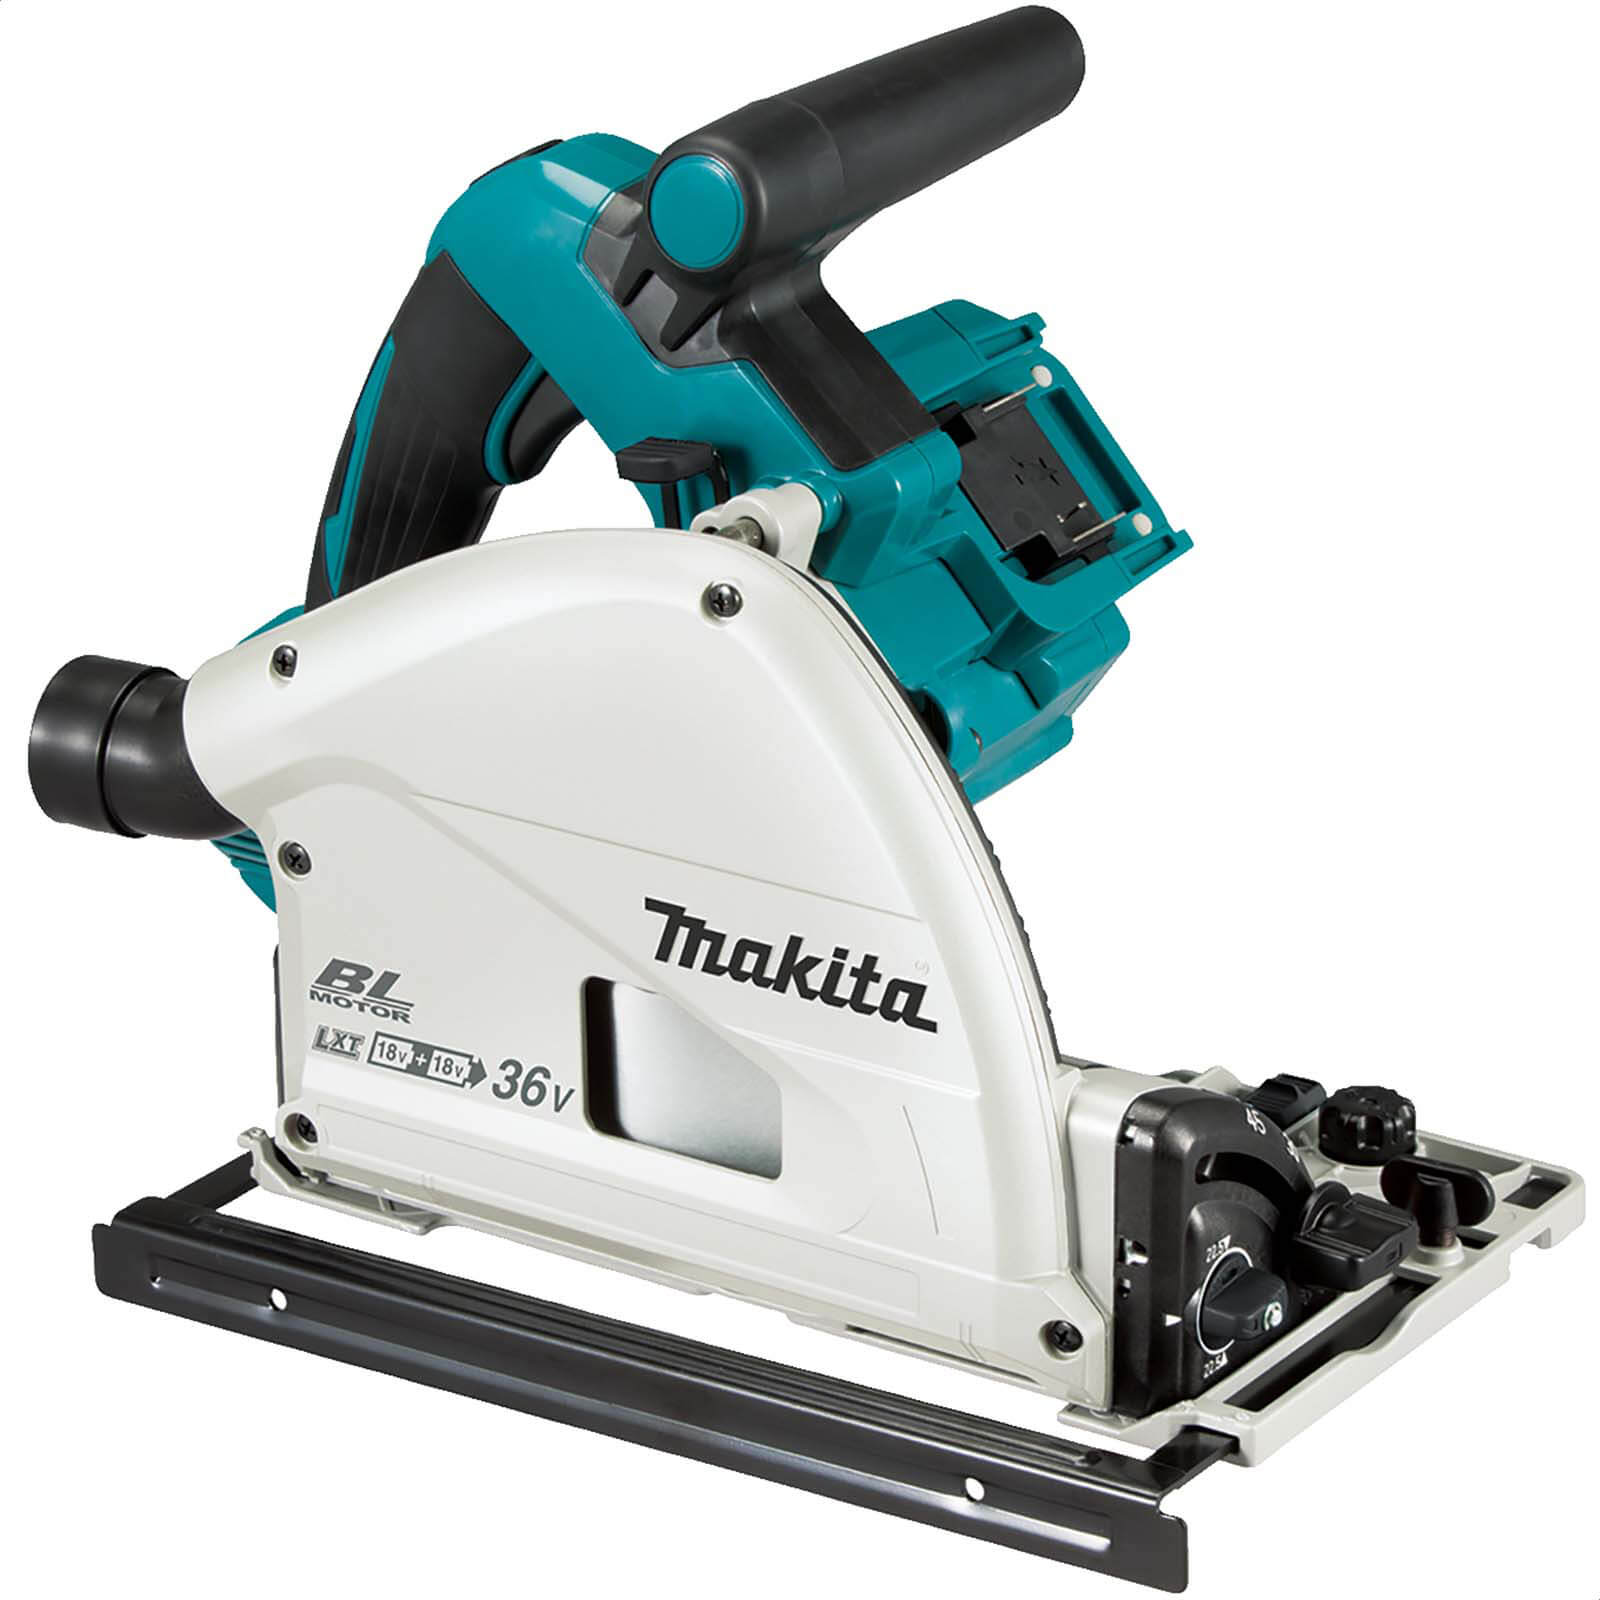 Makita DSP601 Twin 18v LXT Cordless Brushless Plunge Saw 165mm No Batteries No Charger Case